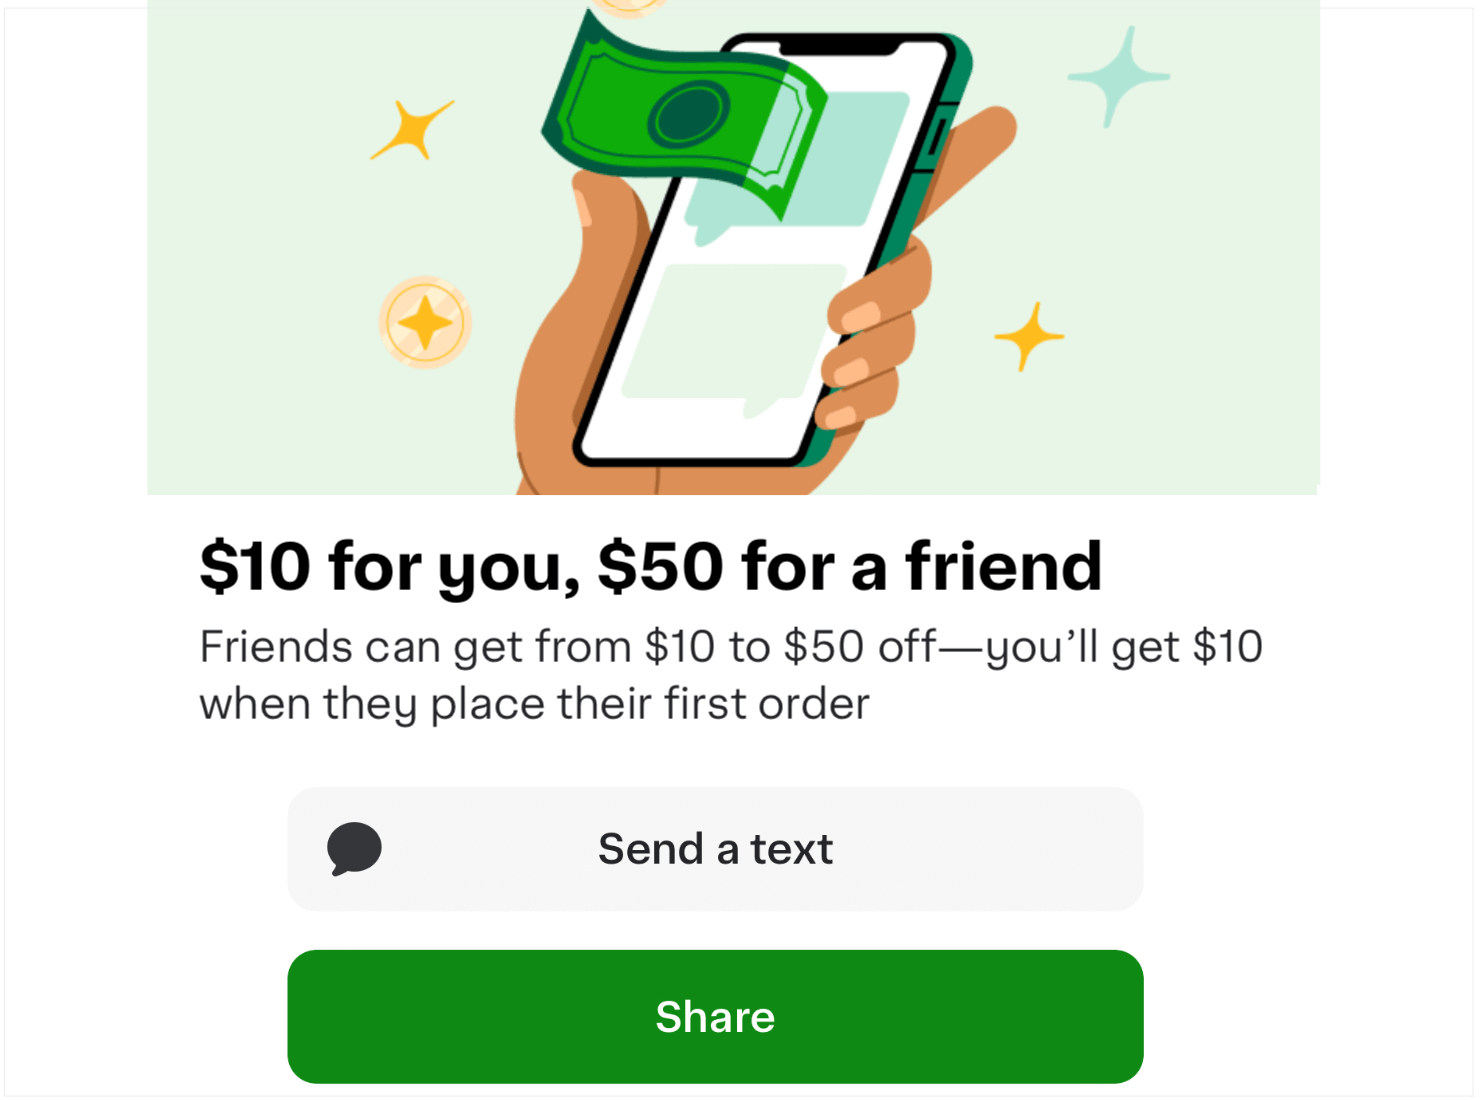 Instacart's in-app referral program. It says "$10 for you, $50 for a friend. Friends can get from $10 to $50 off-you'll get $10 when they place their first order." The CTA buttons say "Send a text" and "Share"